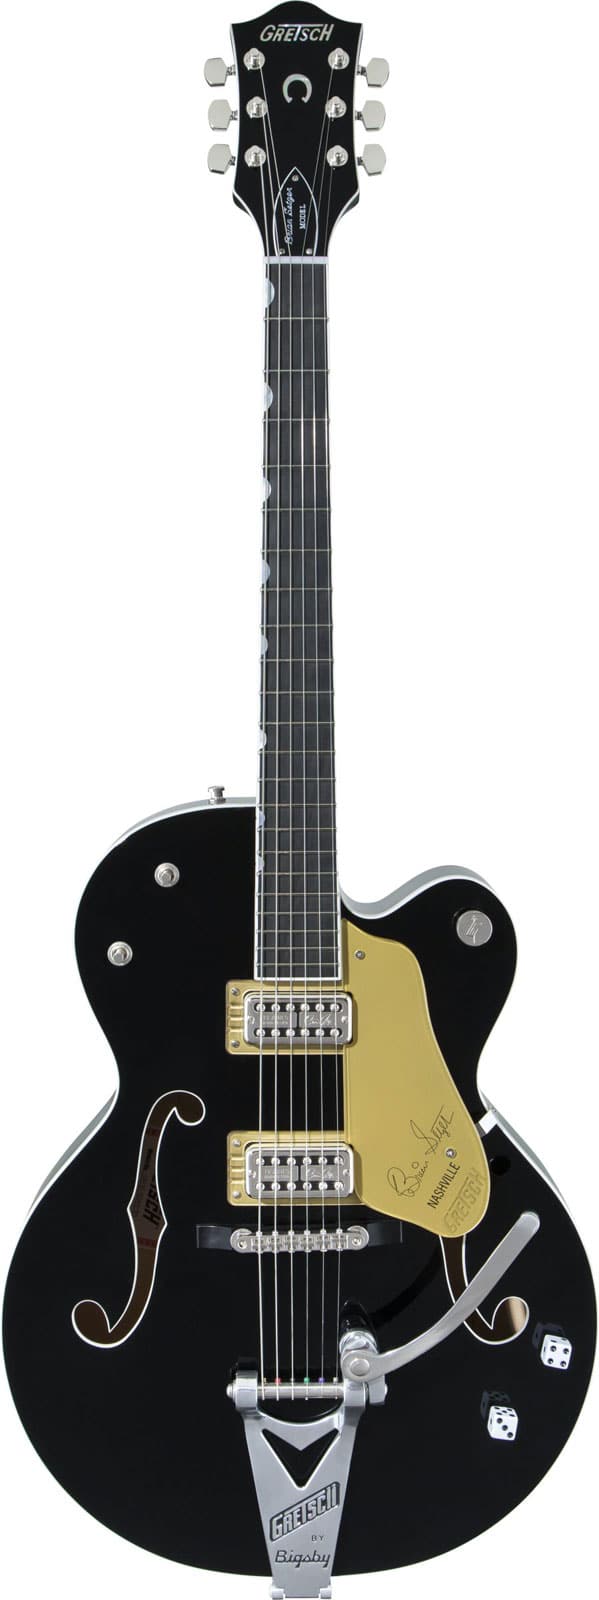 GRETSCH GUITARS G6120T-BSNSH BRIAN SETZER SIGNATURE NASHVILLE HOLLOW BODY WITH BIGSBY EBO, BLACK LACQUER